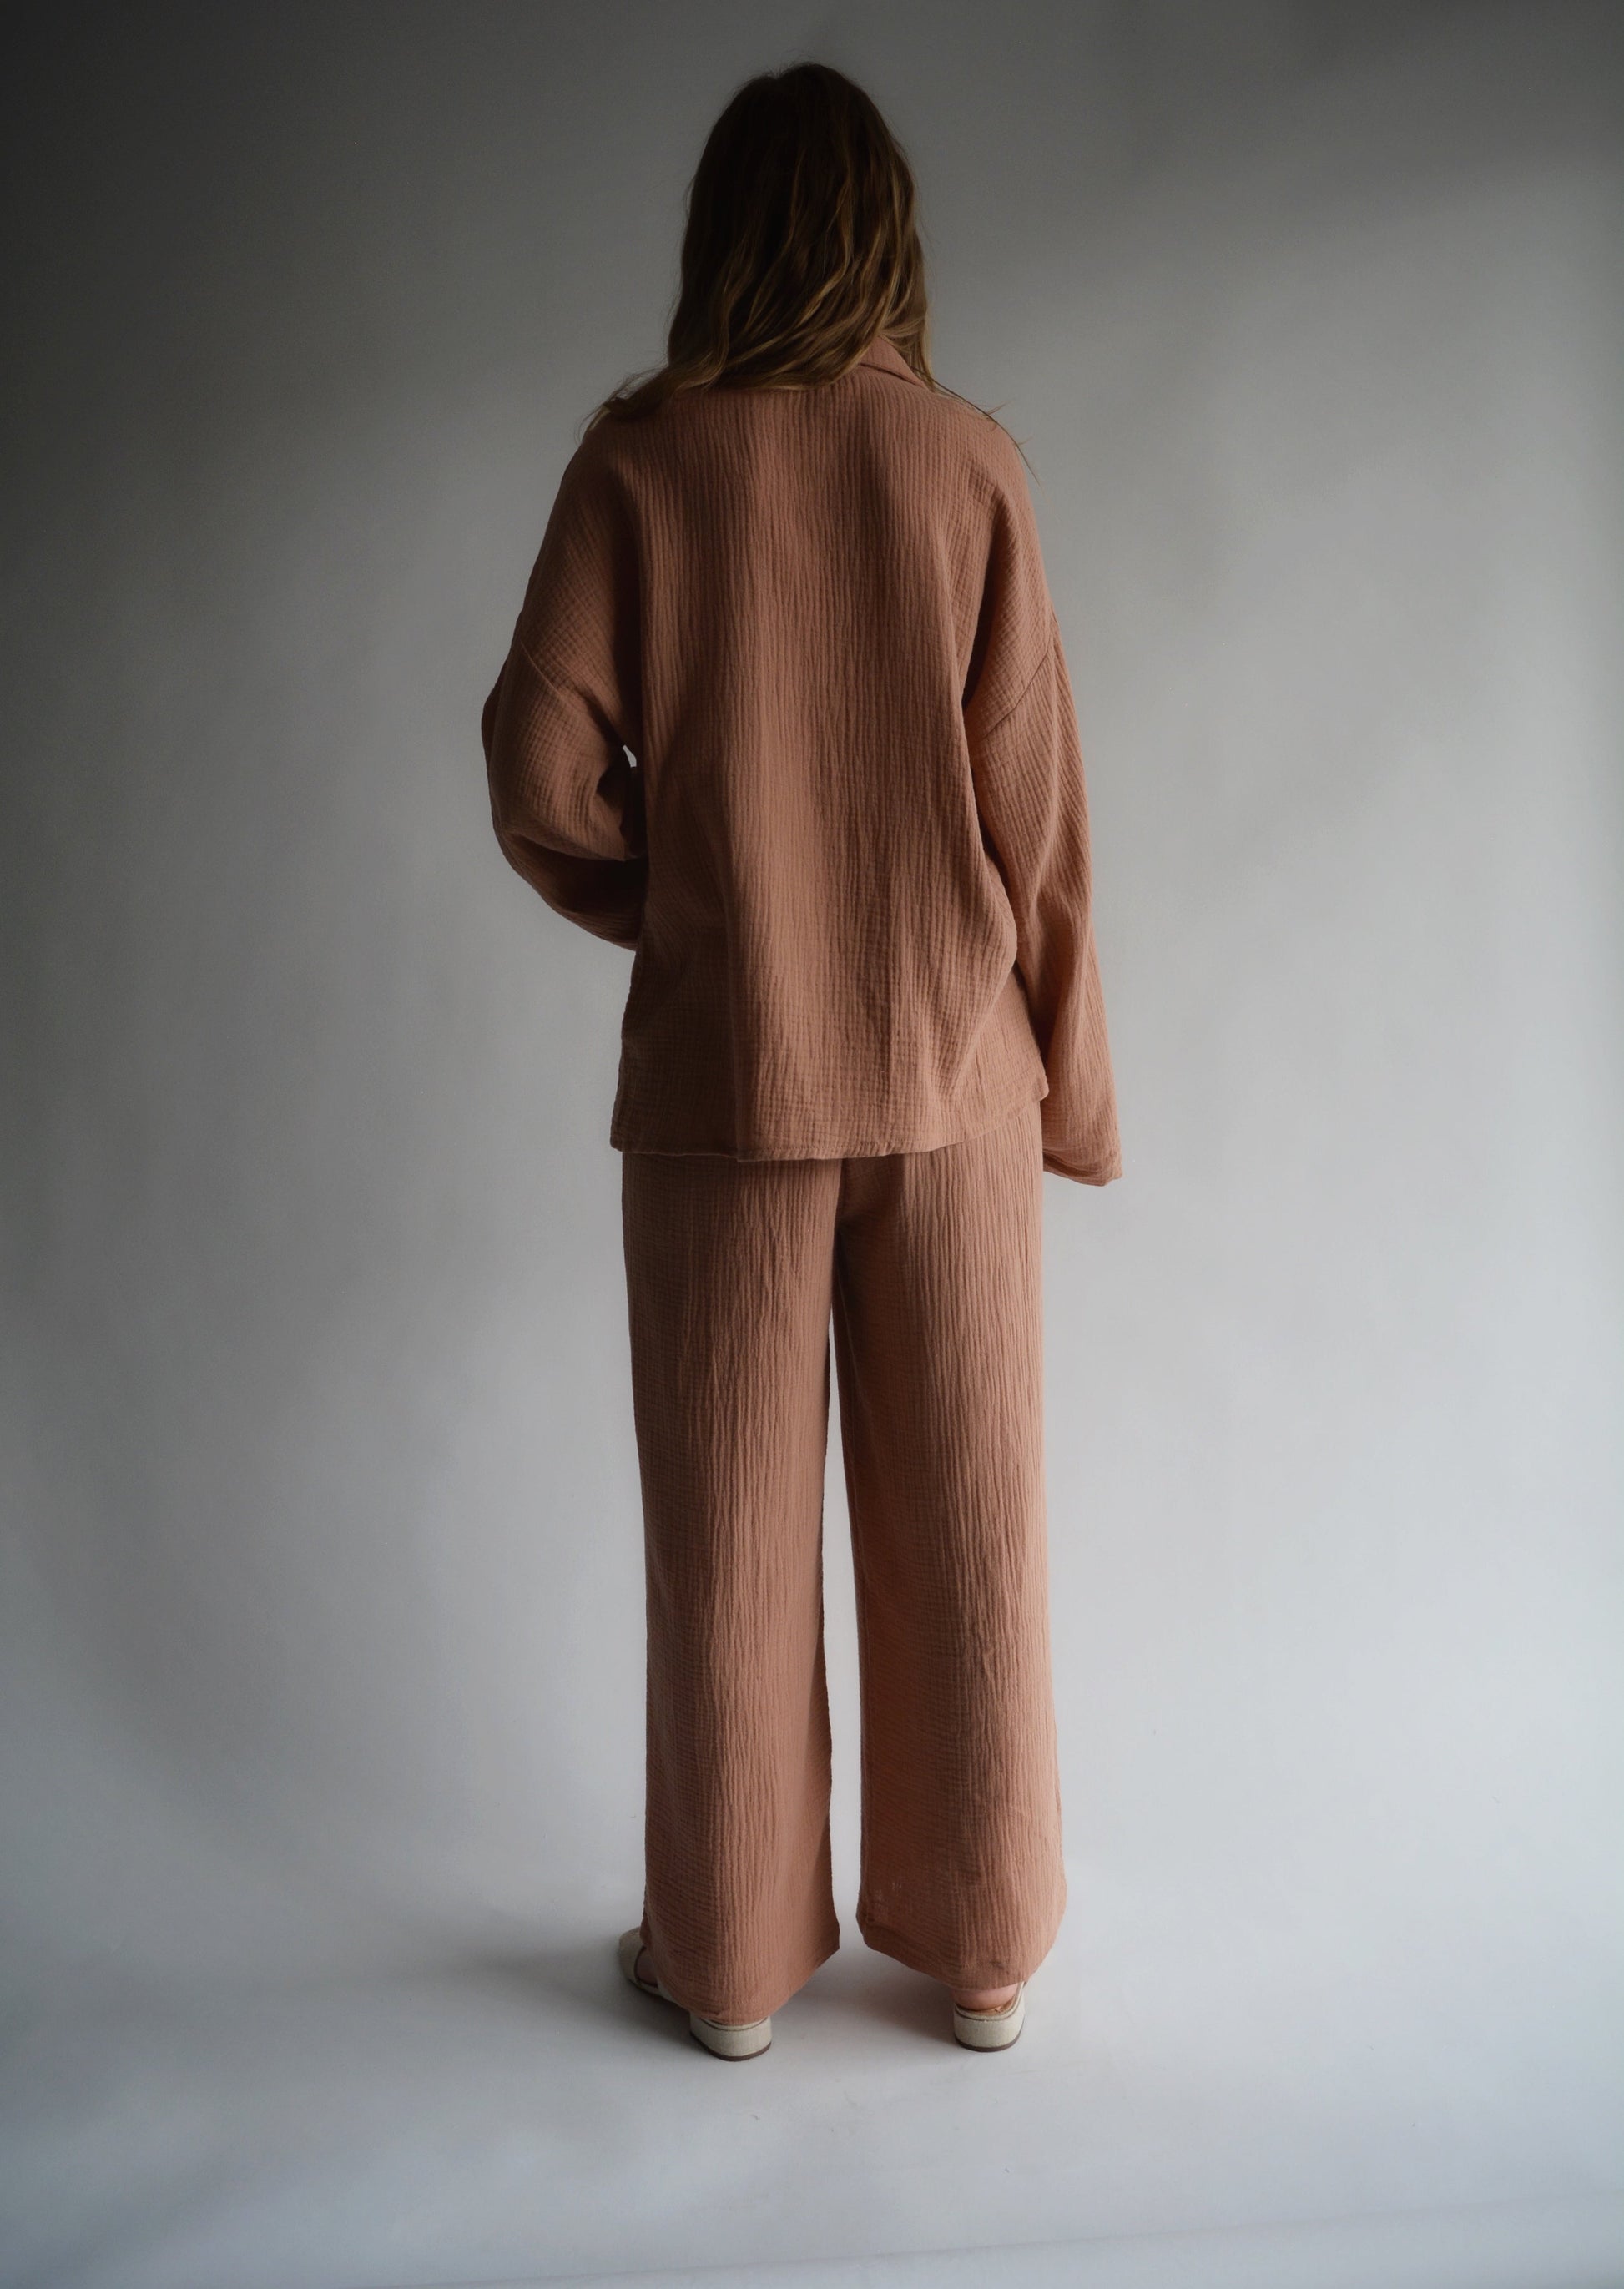 Two-Piece Set: Shirt and Pants in Blush Brown color Cotton Muslin 